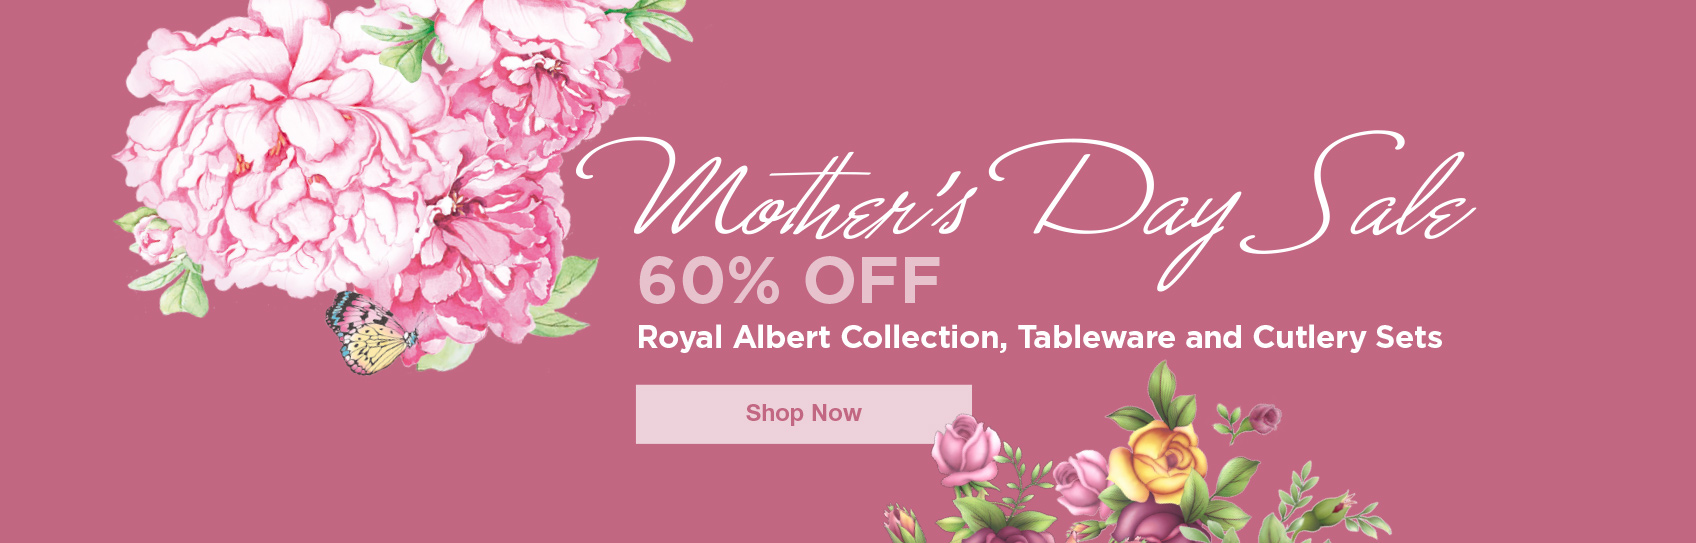 Mother\'s Day Sale - Save 60% Off Royal Albert, Tableware and Cutlery Sets